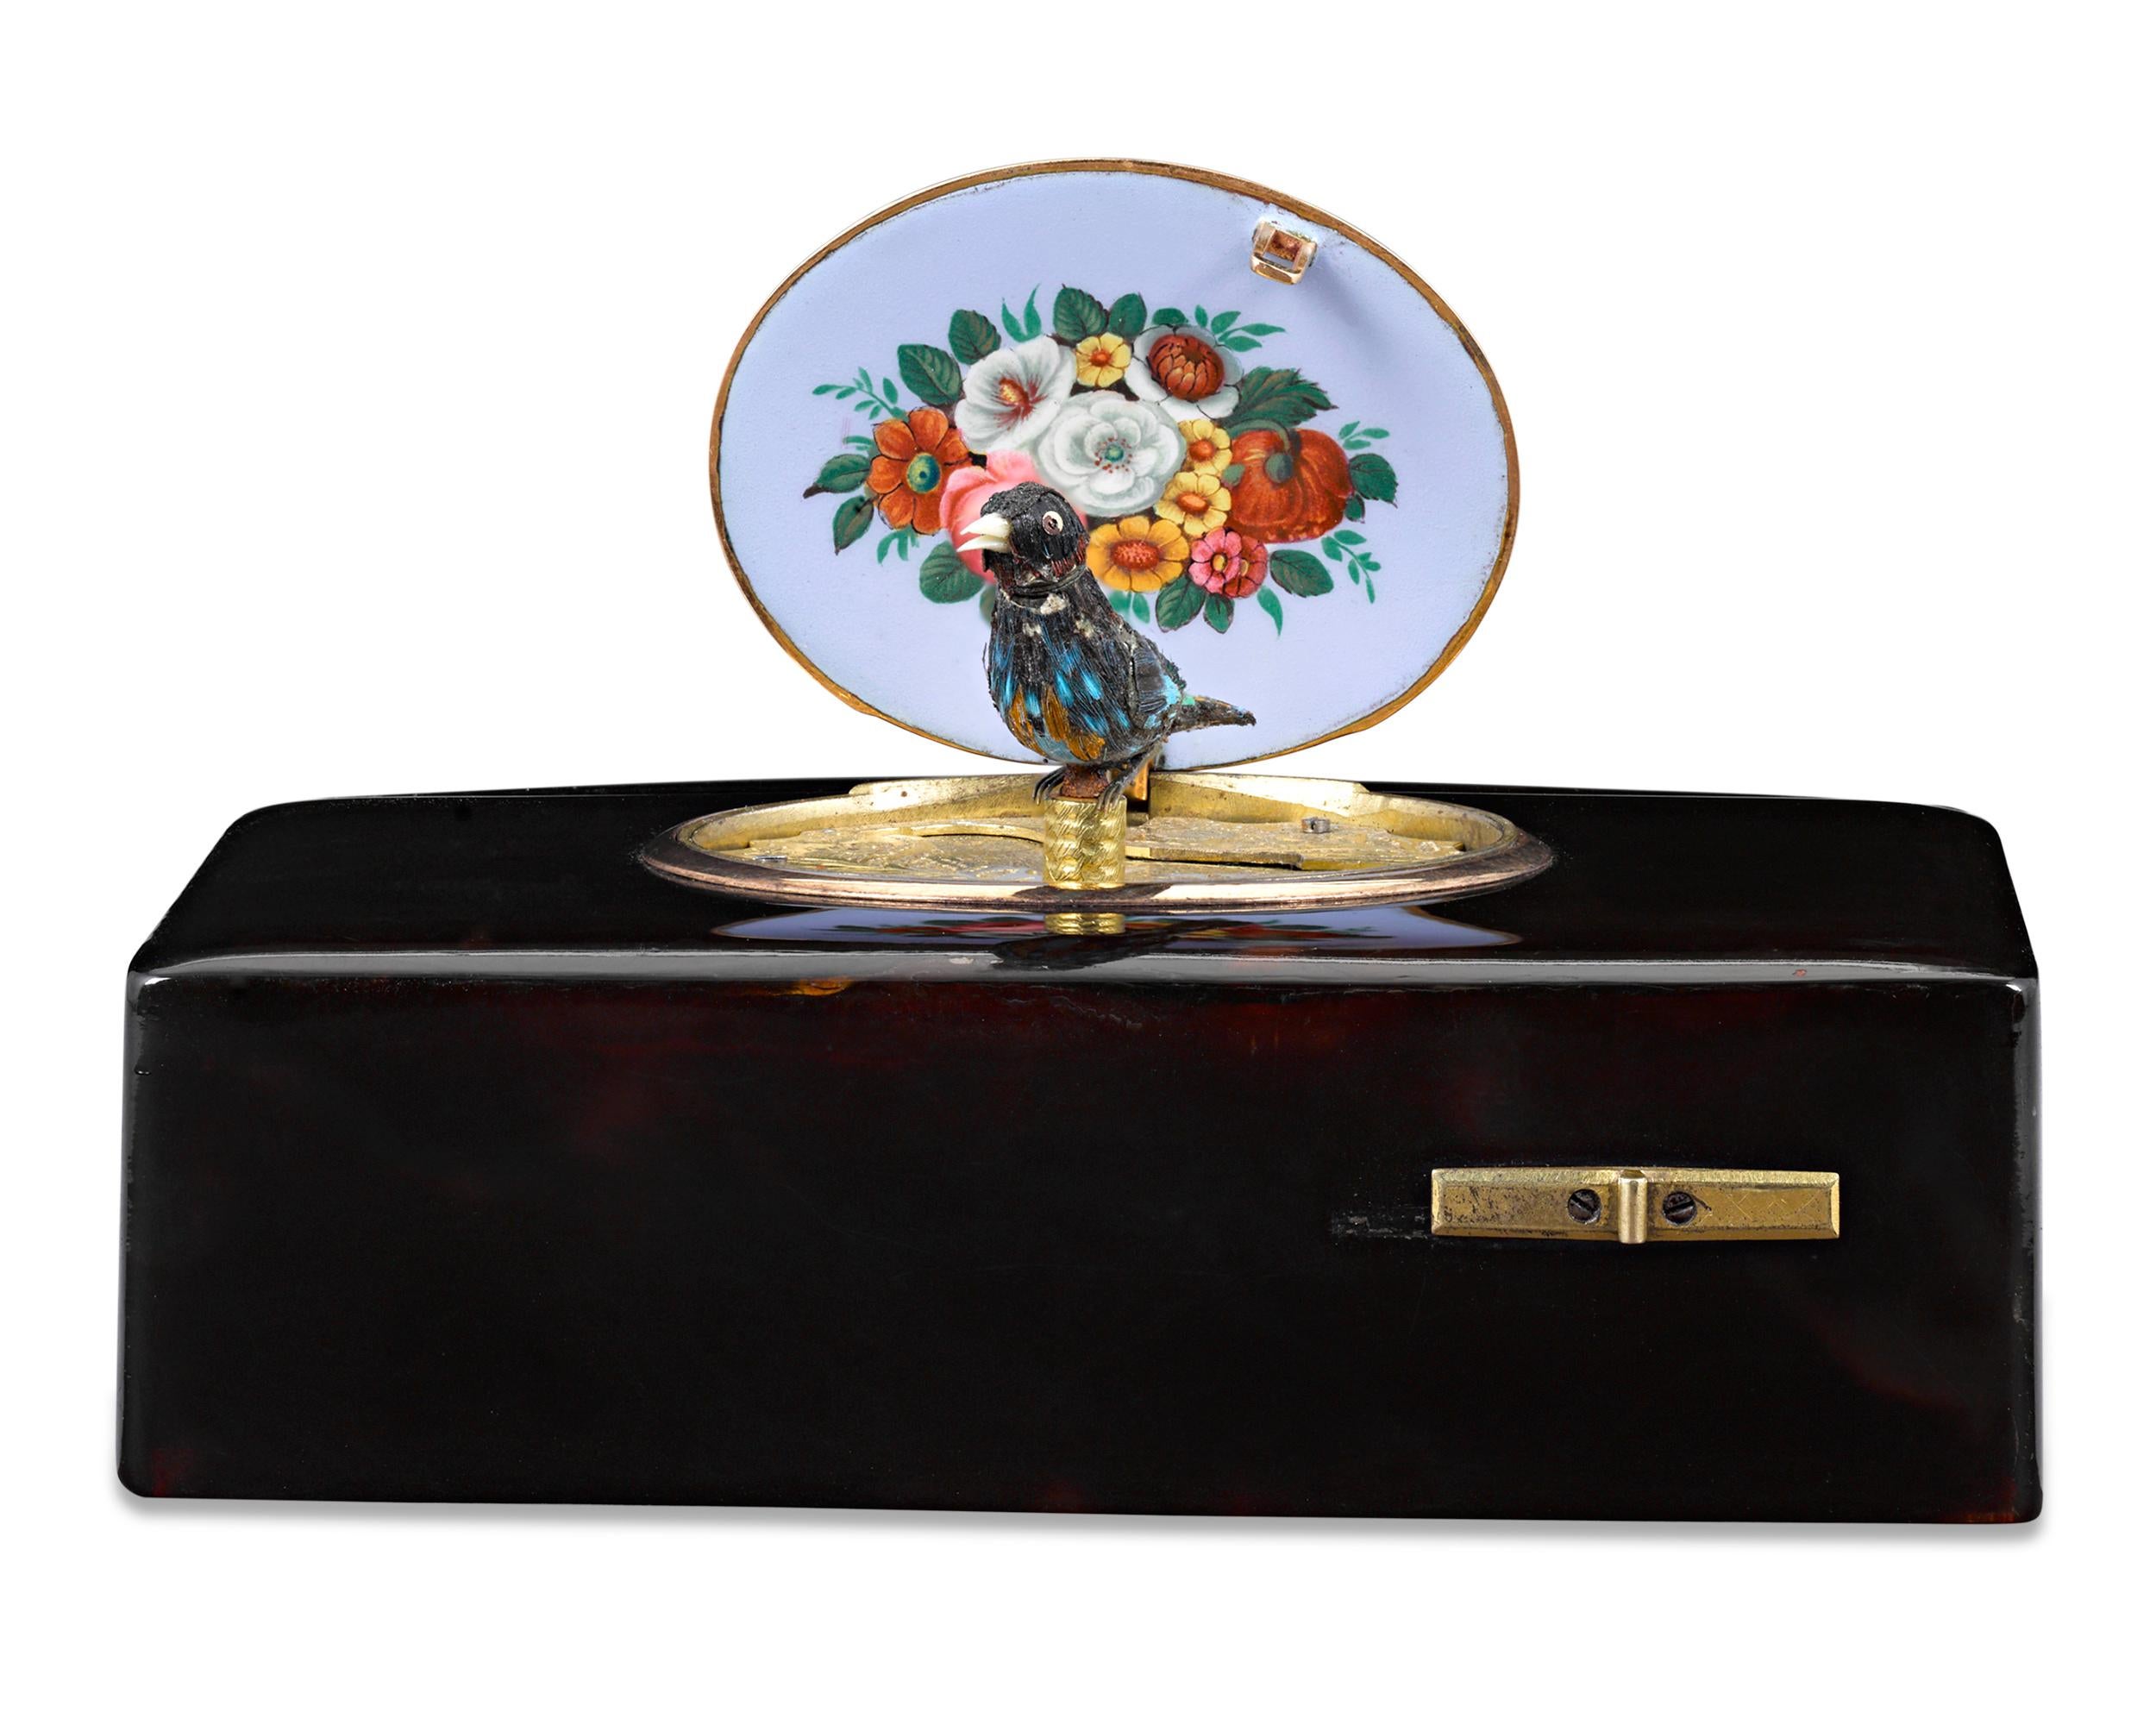 This extremely rare, early Swiss automaton singing bird box by the famed Charles Bruguier is housed in a case enveloped in luxurious tortoiseshell. Even more remarkable than its exterior is the masterpiece housed inside. With just the touch of a